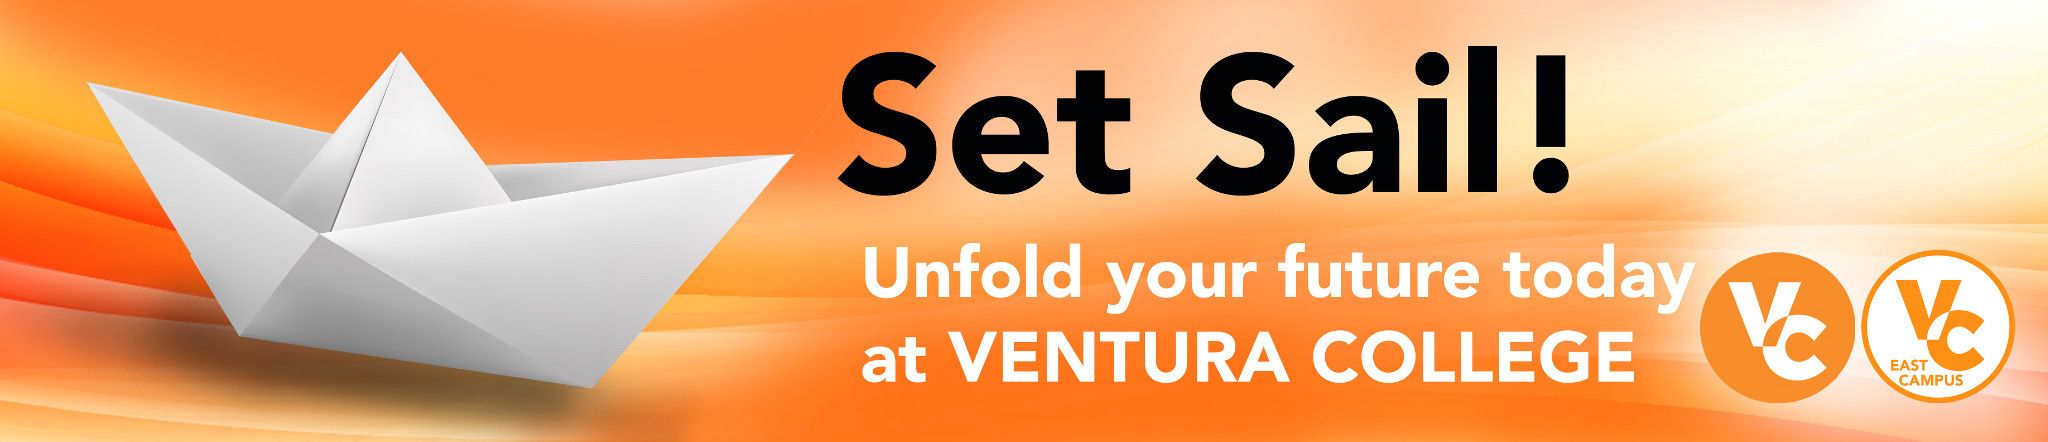 Set Sail! Unfold your future today at Ventura College